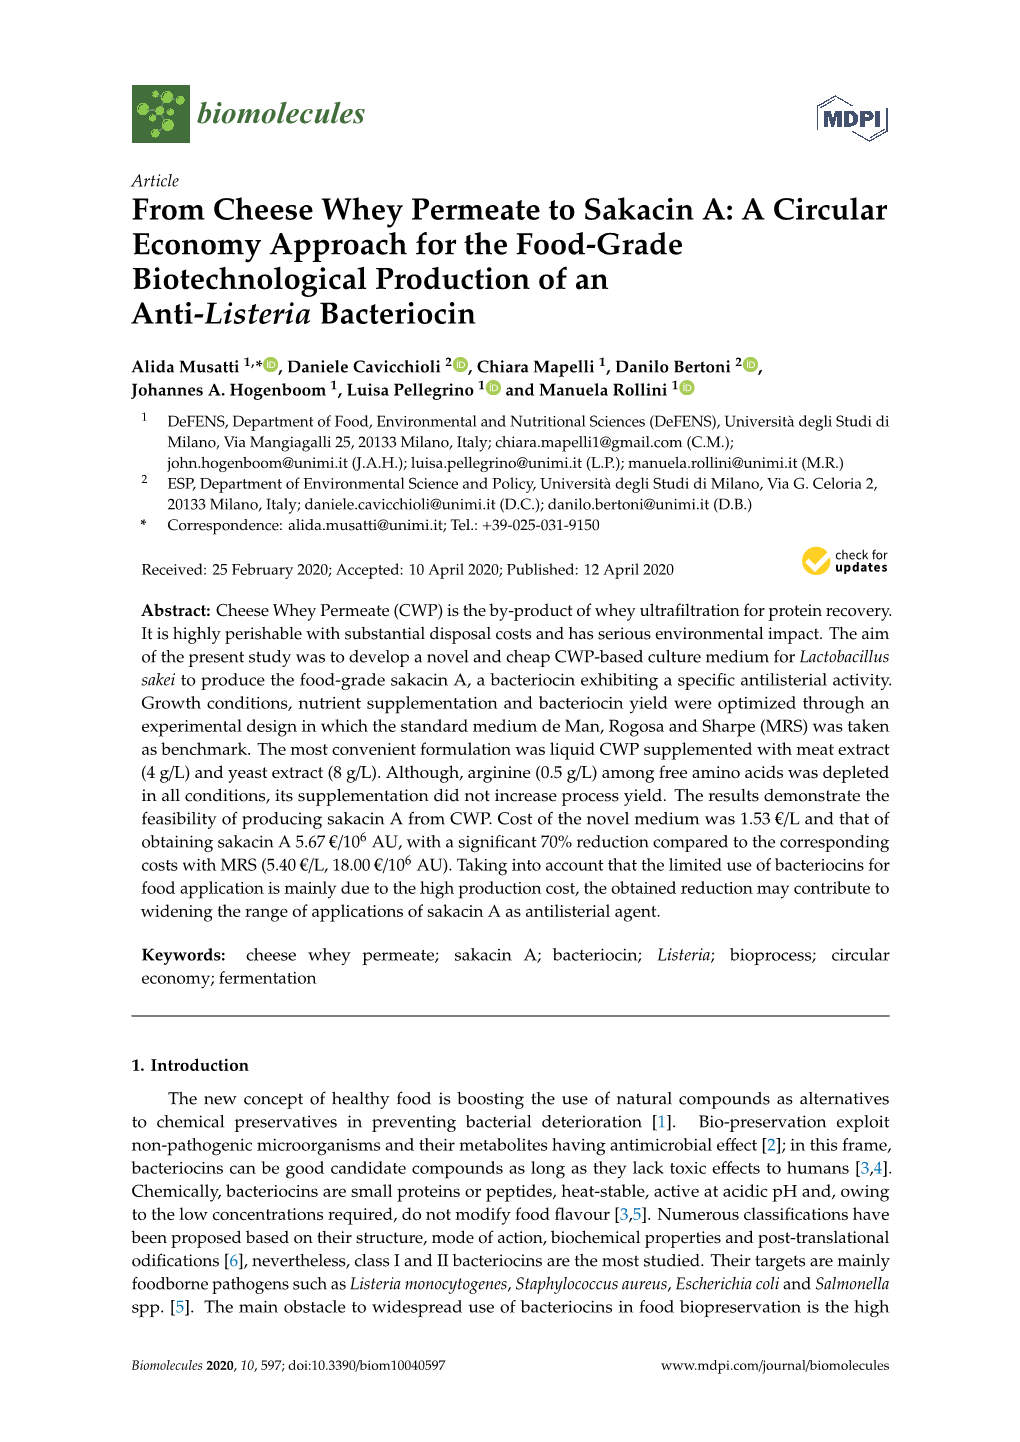 From Cheese Whey Permeate to Sakacin A: a Circular Economy Approach for the Food-Grade Biotechnological Production of an Anti-Listeria Bacteriocin